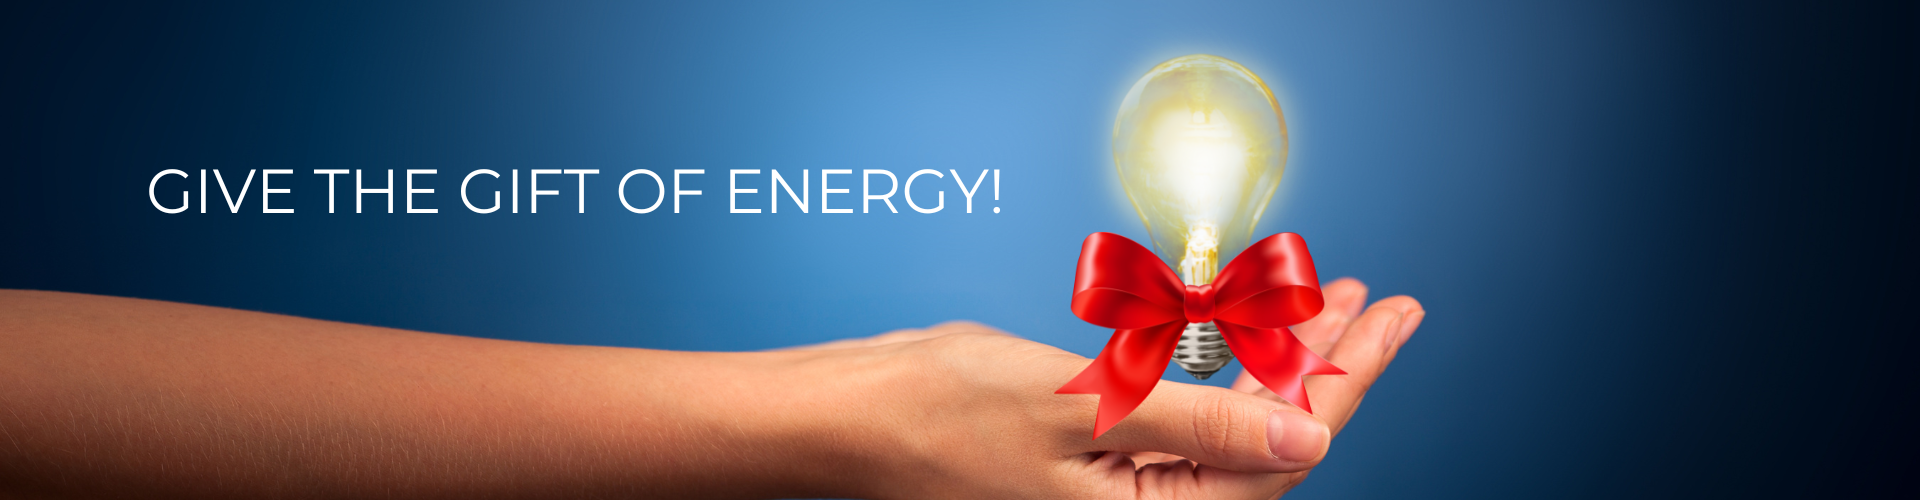 Give the gift of energy